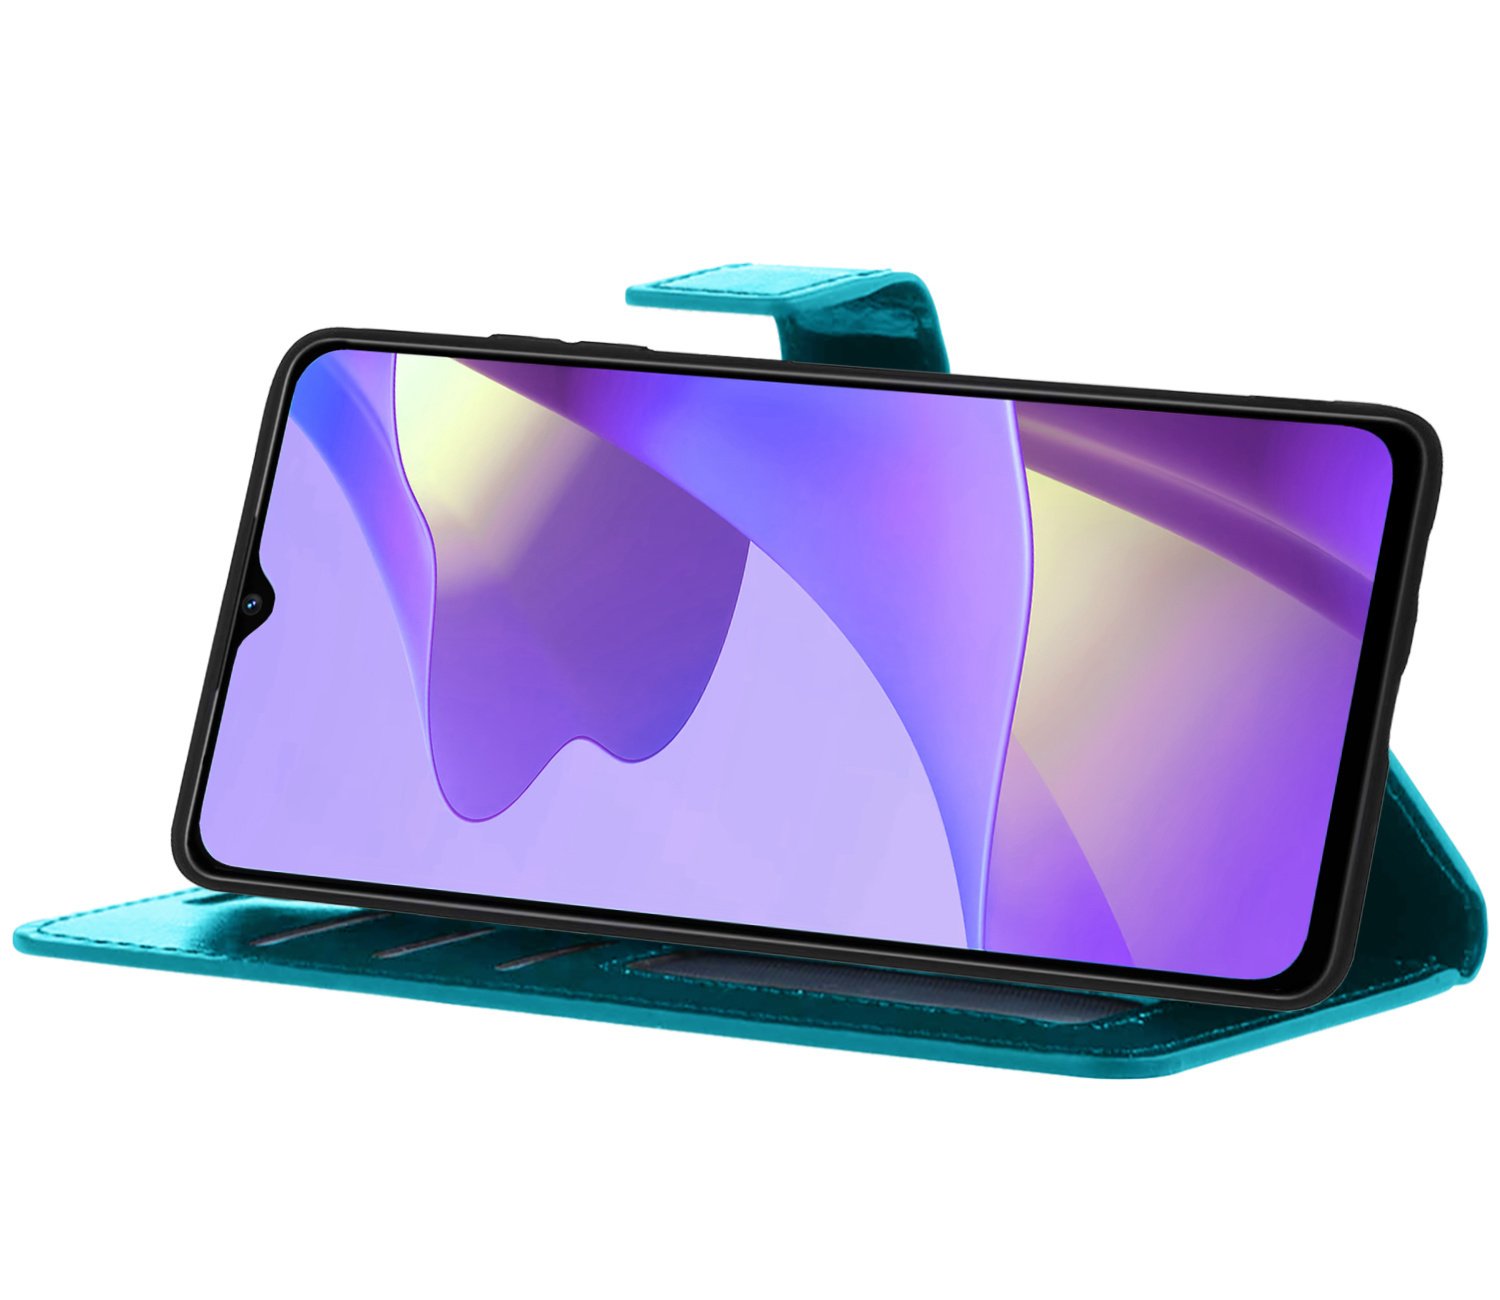 Nomfy OPPO A16s Hoesje Bookcase Met 2x Screenprotector - OPPO A16s Screenprotector 2x - OPPO A16s Book Case Met 2x Screenprotector Turquoise